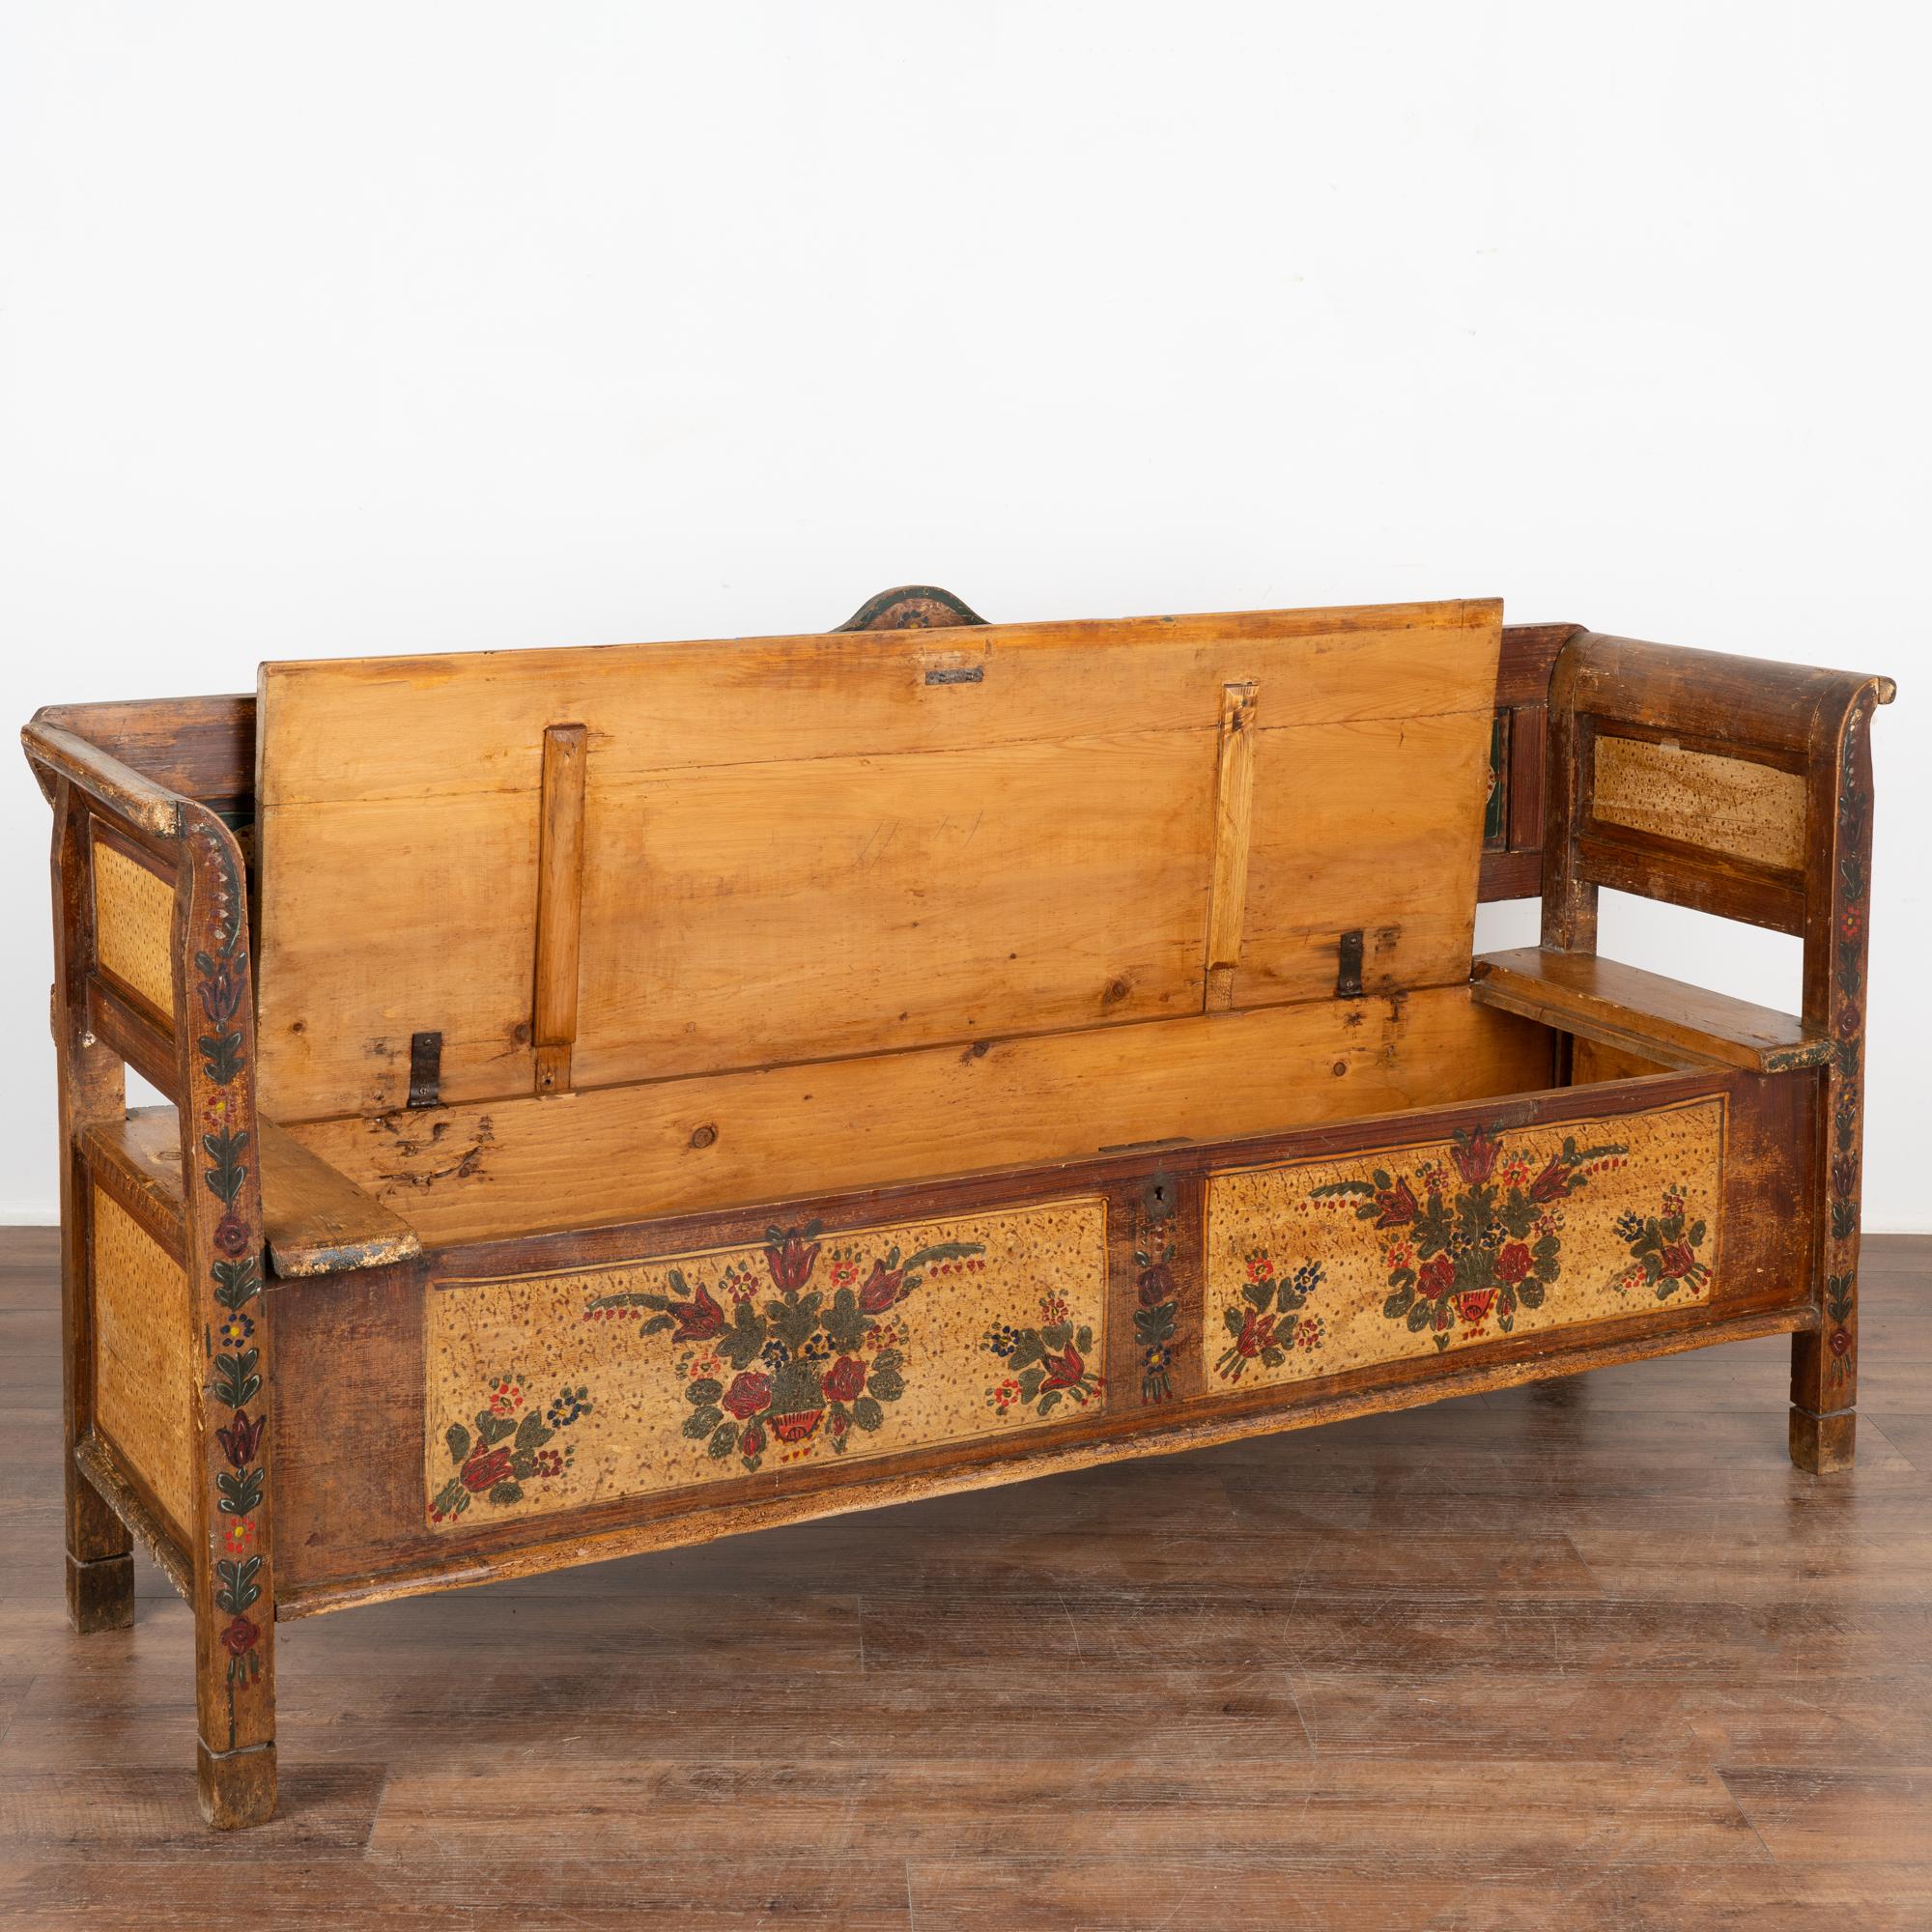 Folk Art Original Painted Pine Bench With Storage, Hungary dated 1910 For Sale